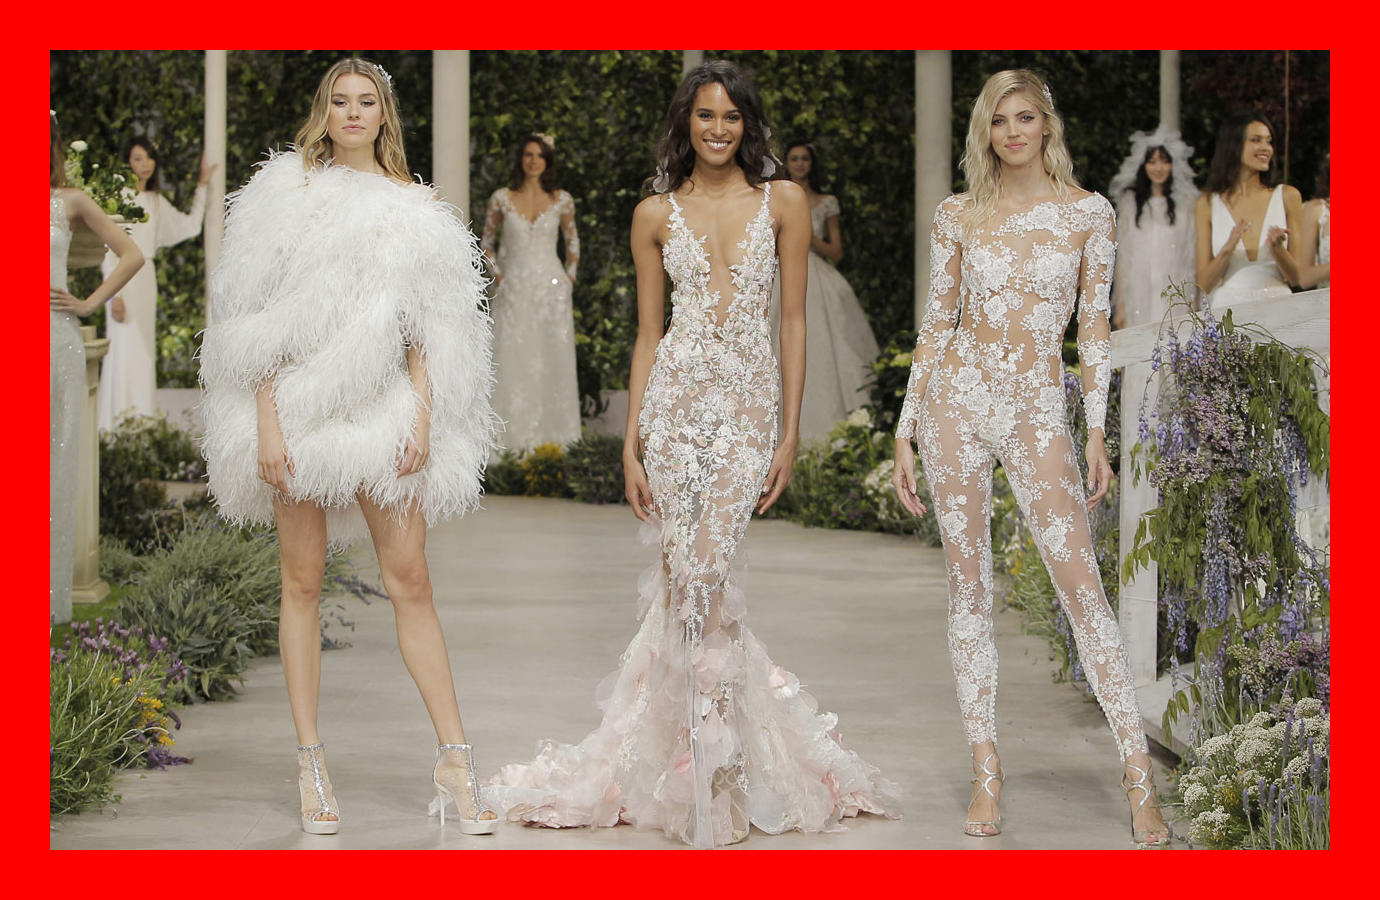 Wedding gowns for 2019: see the trends from bridal weeks